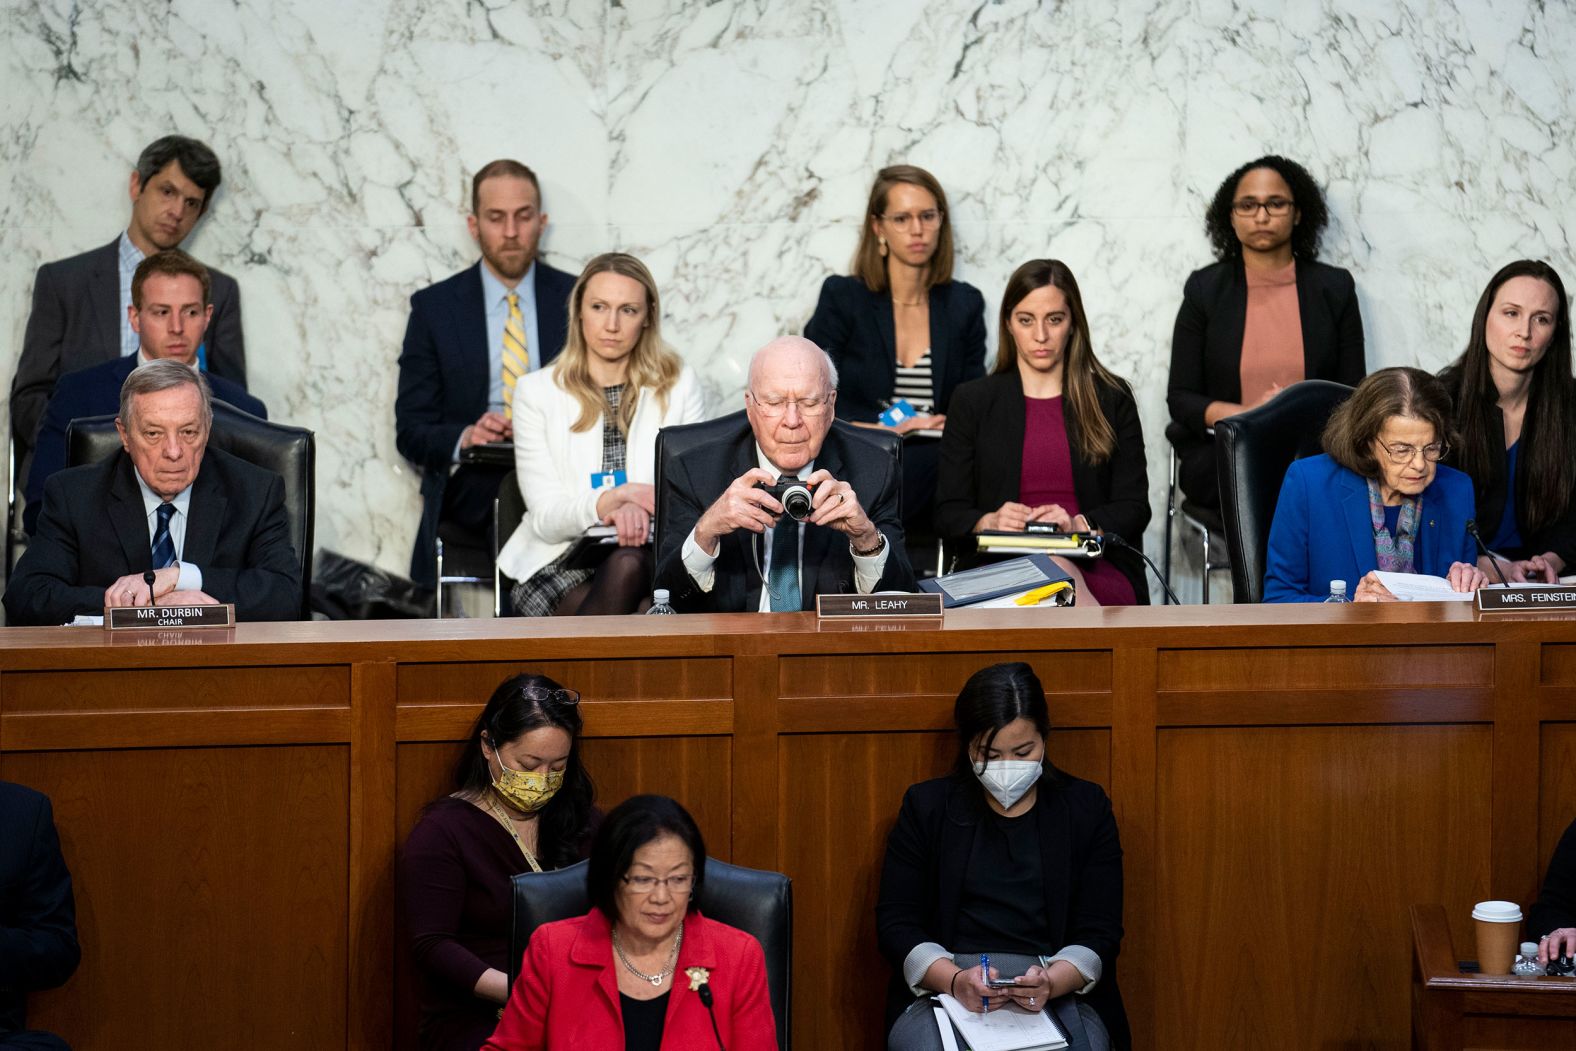 US Sen. Patrick Leahy takes a photo from his seat on March 21.